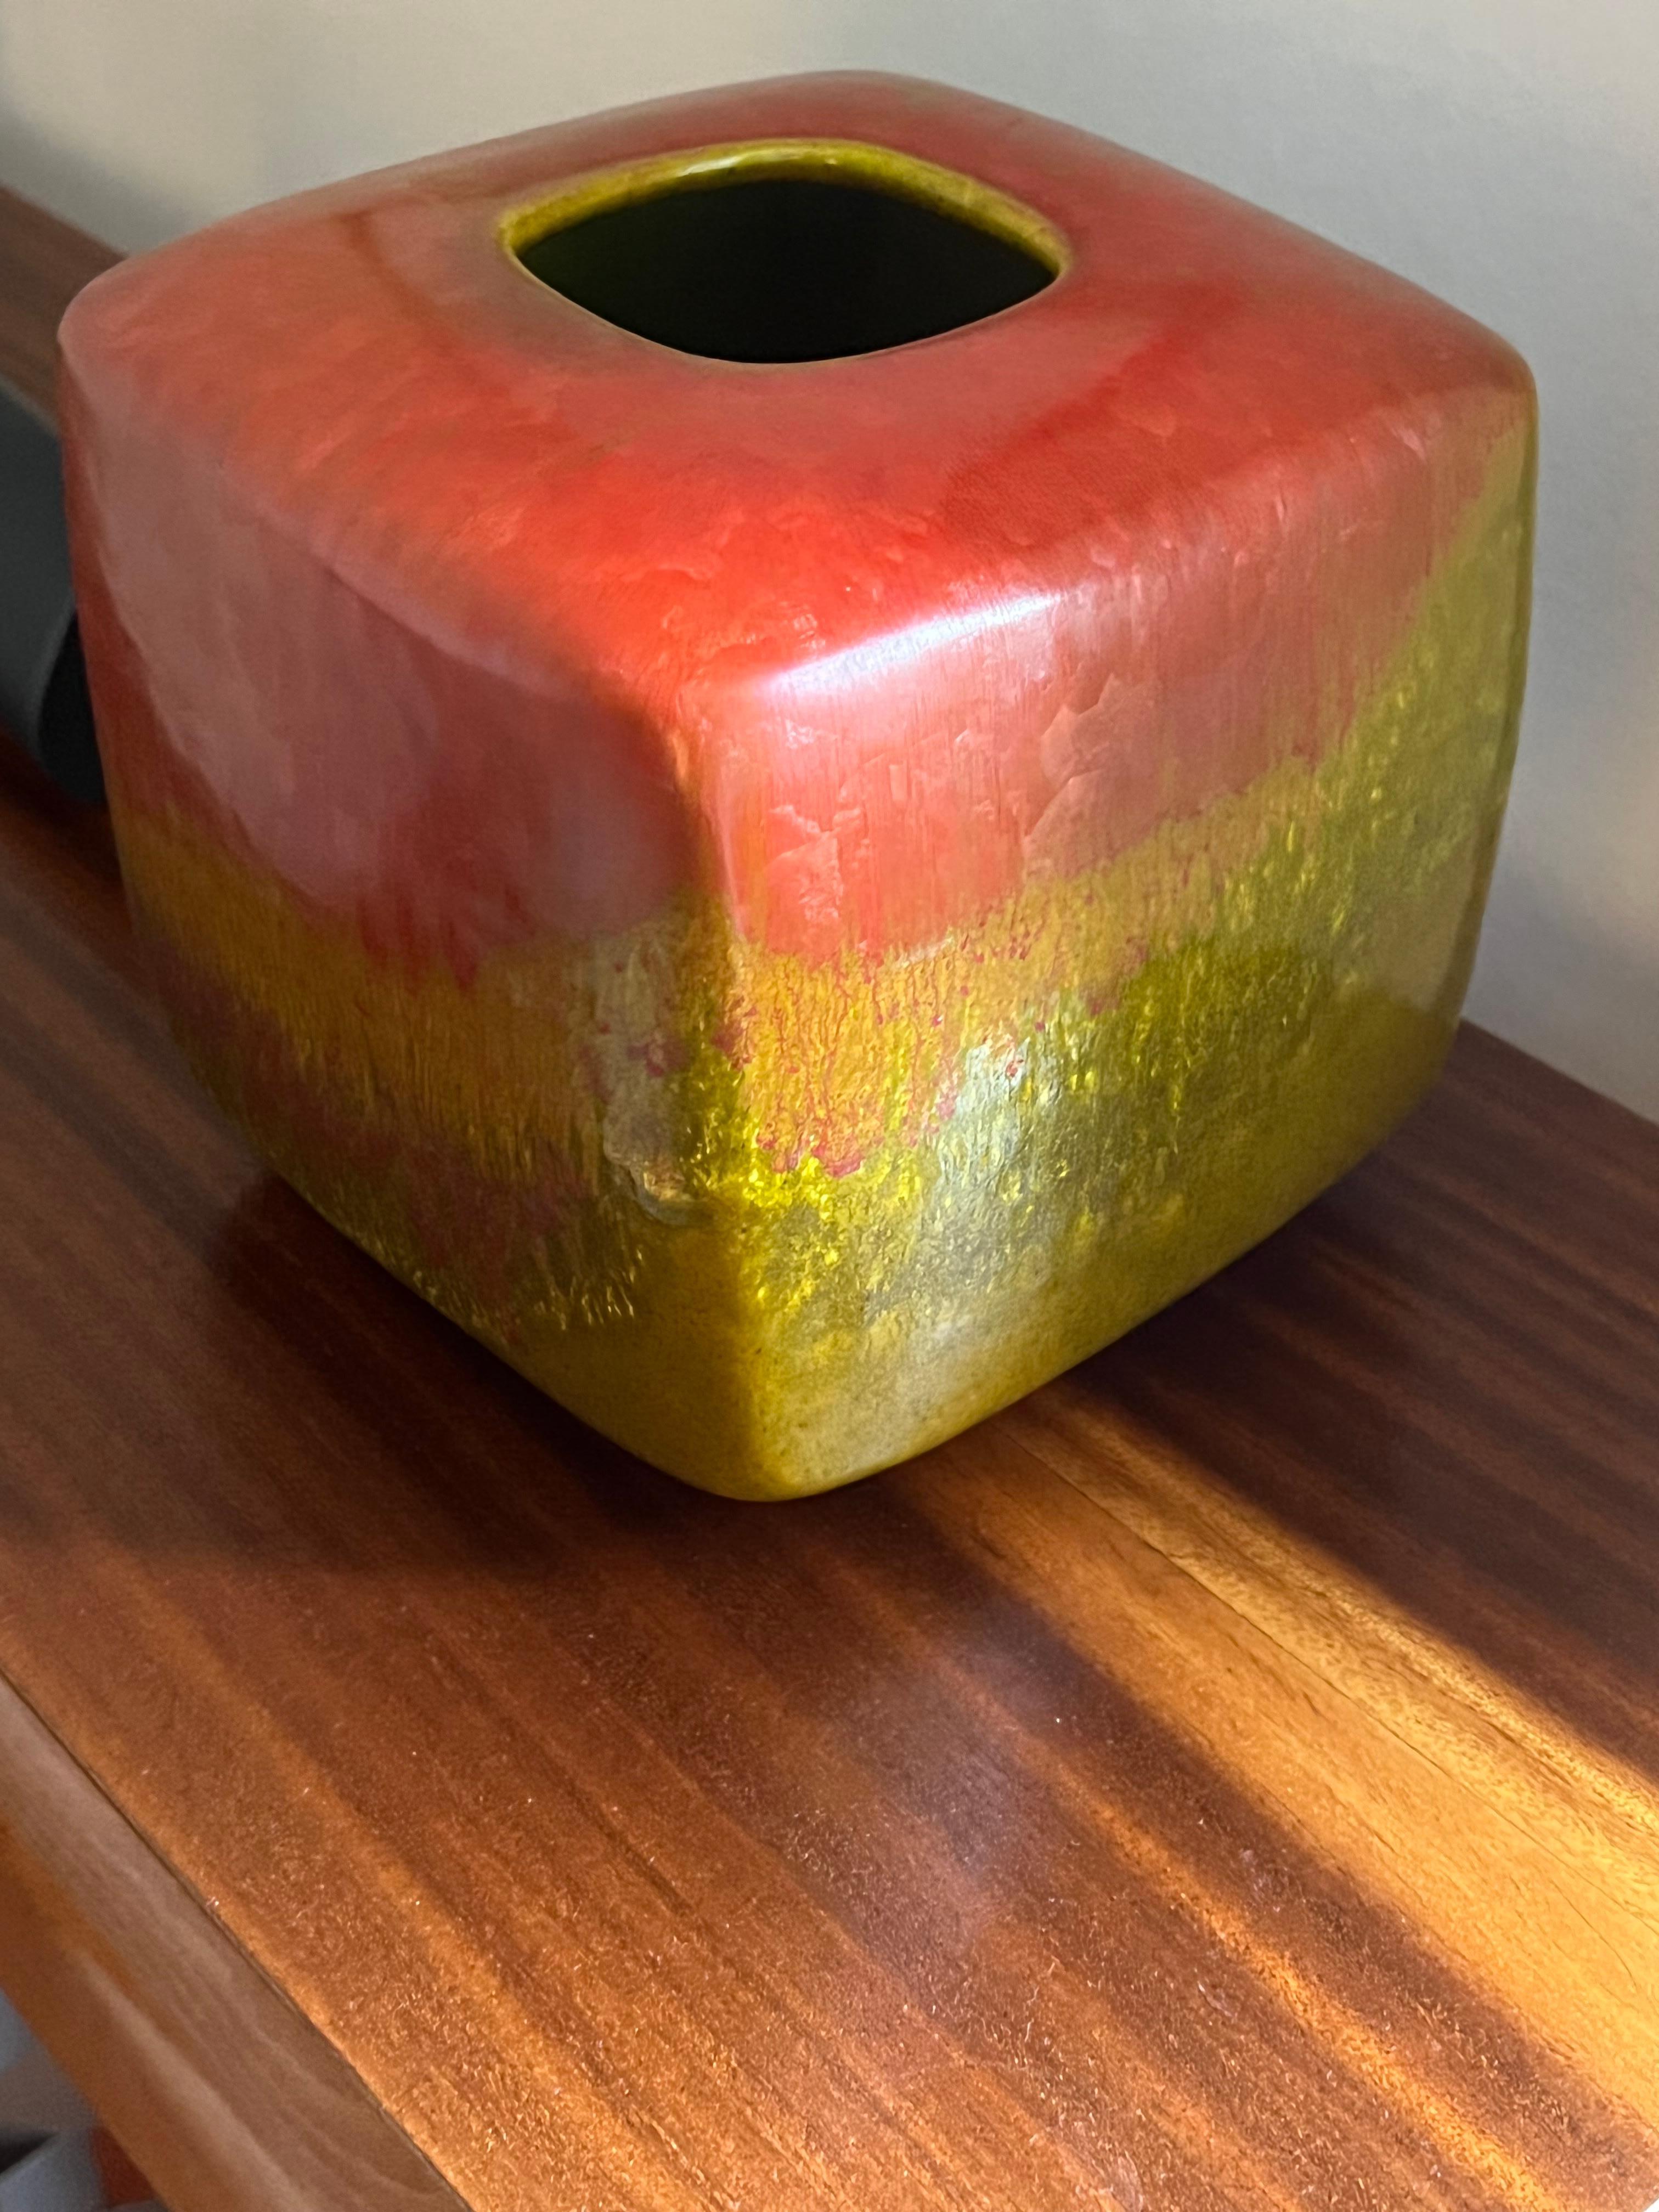 Alessio Tasca, Unique Vase, Glazed Ceramic, Italy, c. 1970s In Good Condition For Sale In High Point, NC